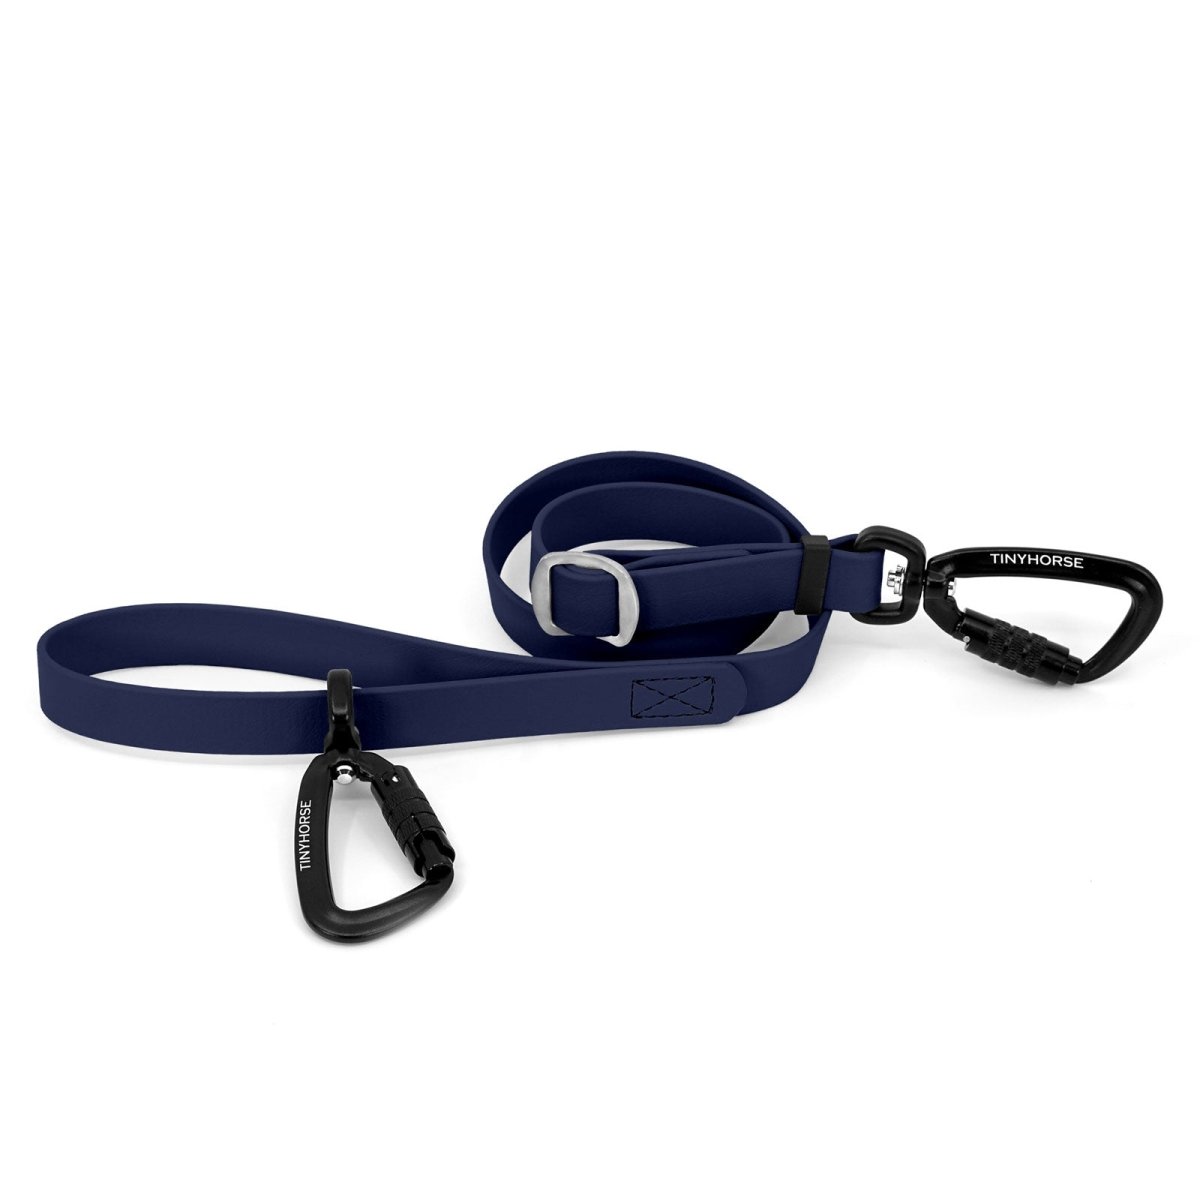 An adjustable navy blue-coloured Lead-All Pro made of BioThane with 2 auto-locking carabiners